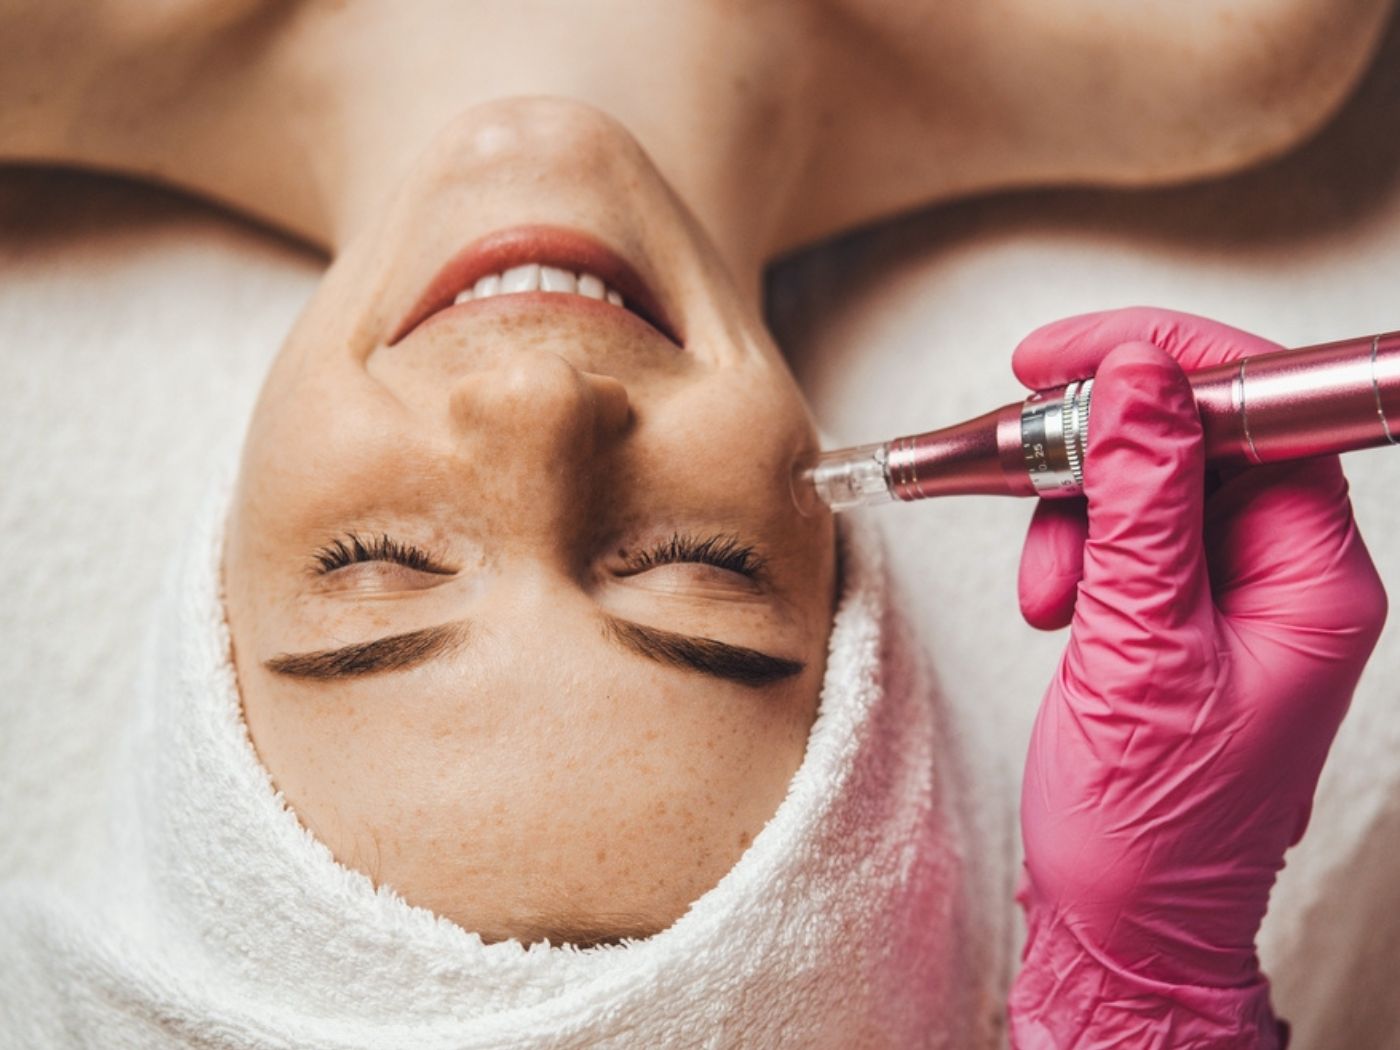 Woman at a spa getting microdermabrasion done with a device